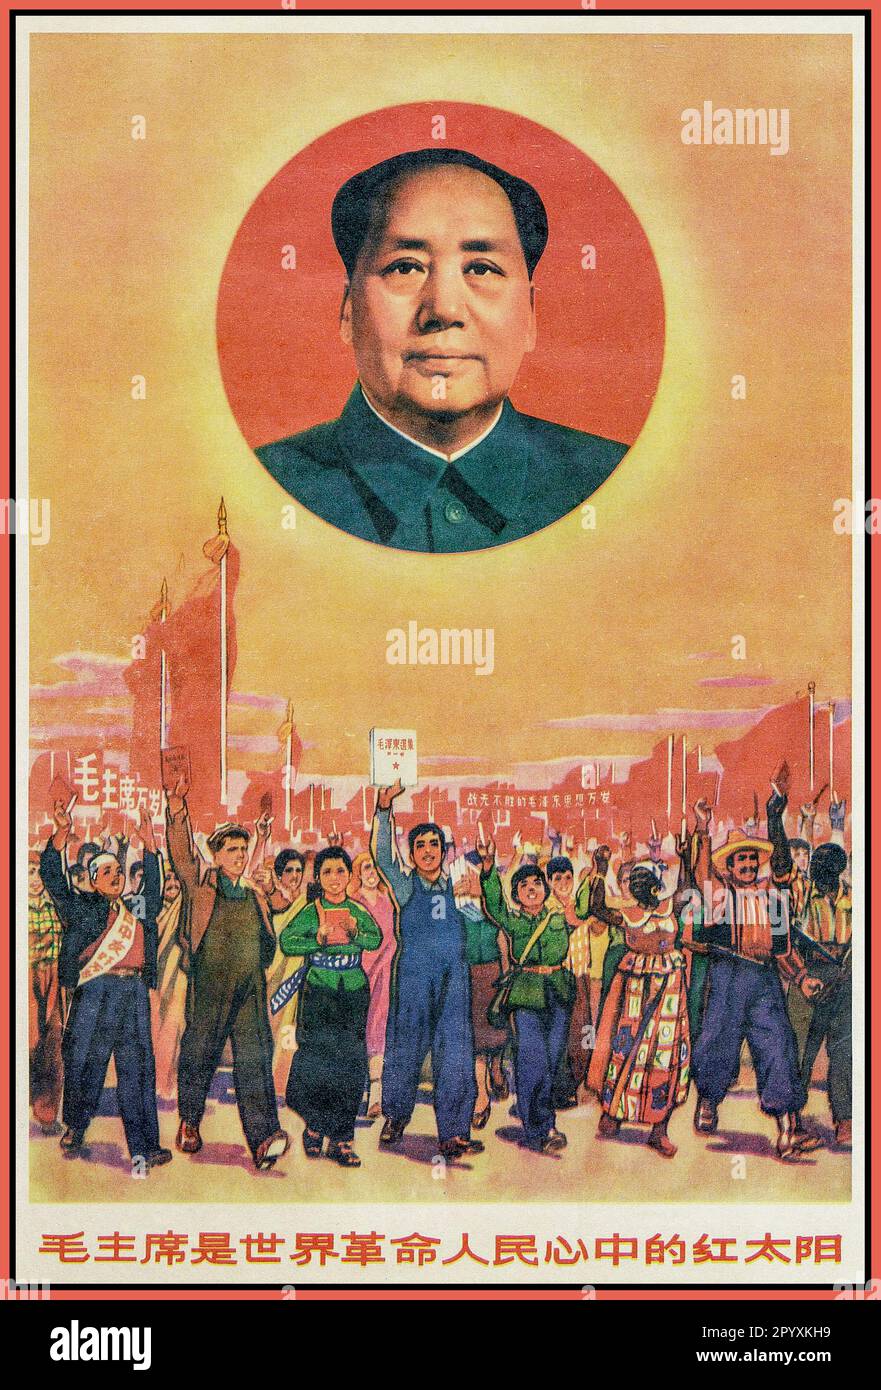 CHAIRMAN MAO Propaganda Revolution Poster 'Chairman Mao is the red sun in the hearts of the worlds revolutionary people' Chinese People marching holding aloft thel ittle red Book  'thoughts of Chairman Mao'   1960's China Cultural Revolution Era Chinese historic poster featuring ‘red book’ & Chairman Mao Tse-tung Stock Photo